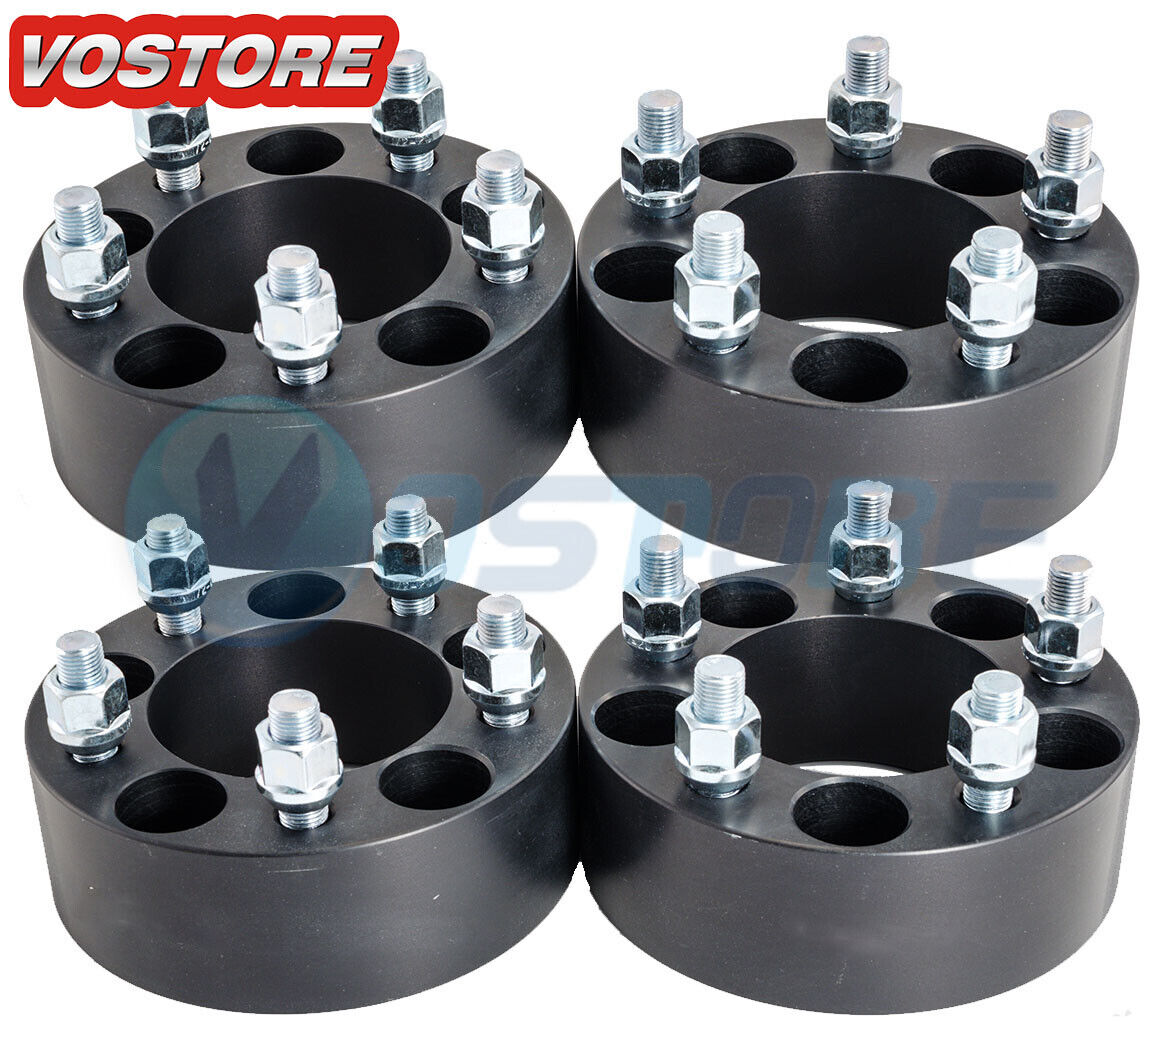 (4) 2 inch 5x4.5 Black Wheel Spacers Adapters fits Ford Mustang Ranger Explorer